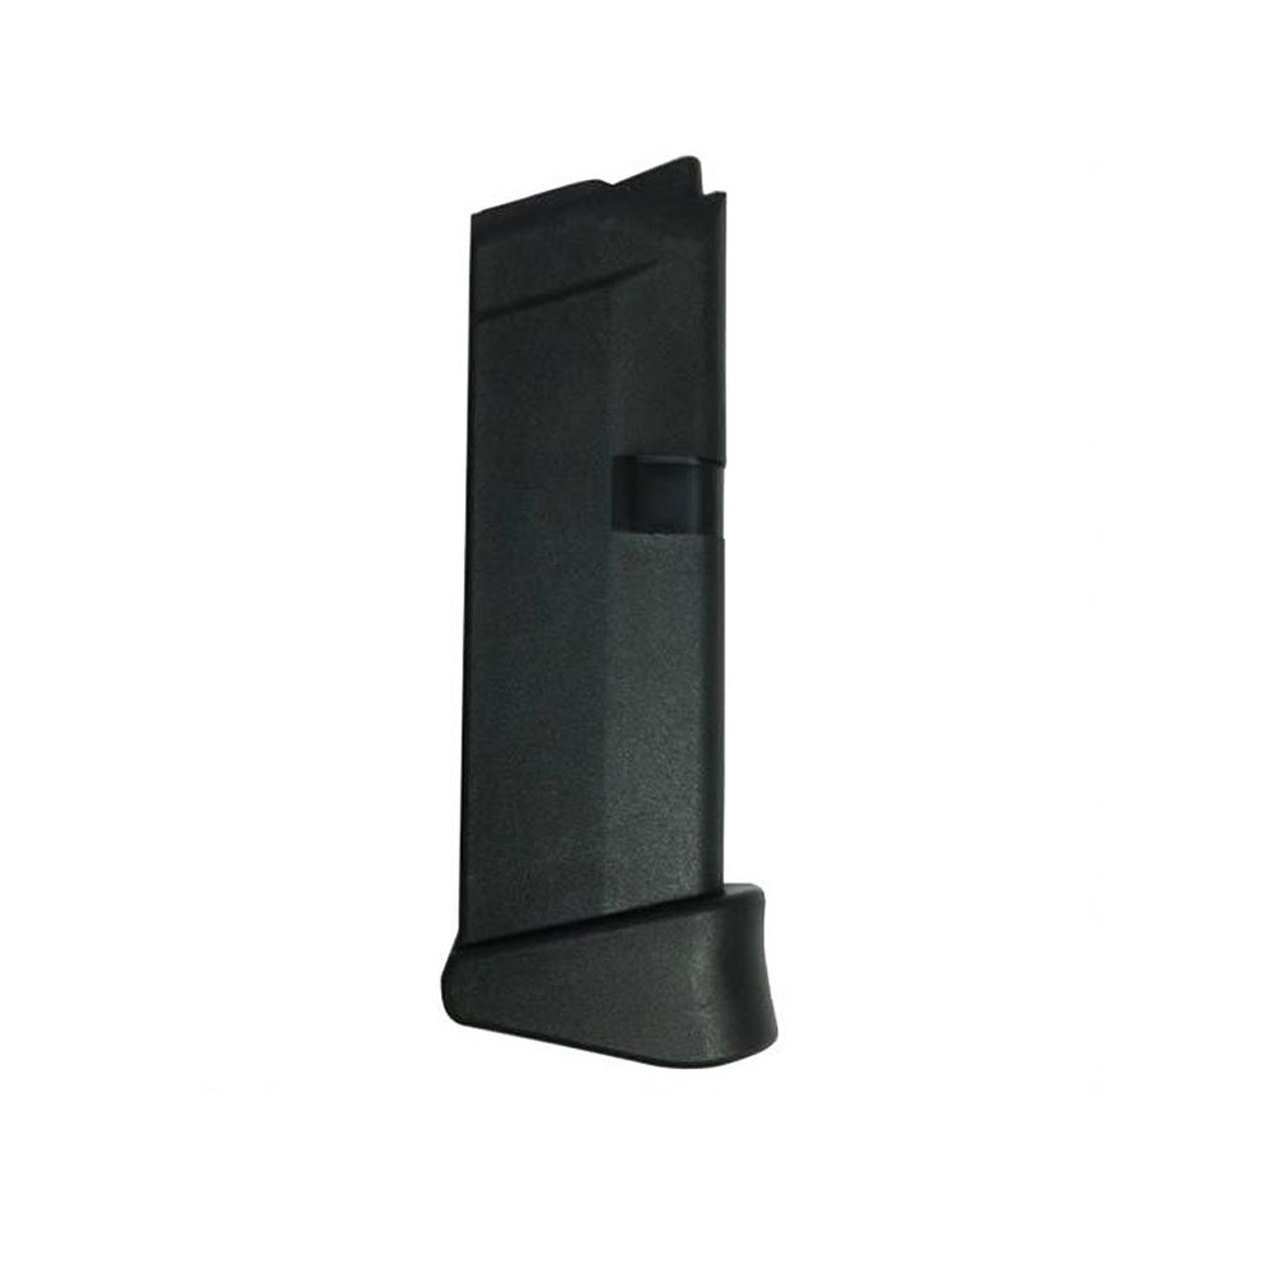 GLOCK G42 compatible 380 ACP 6rd Black Magazine with Extention (MF08833) - $22.31 